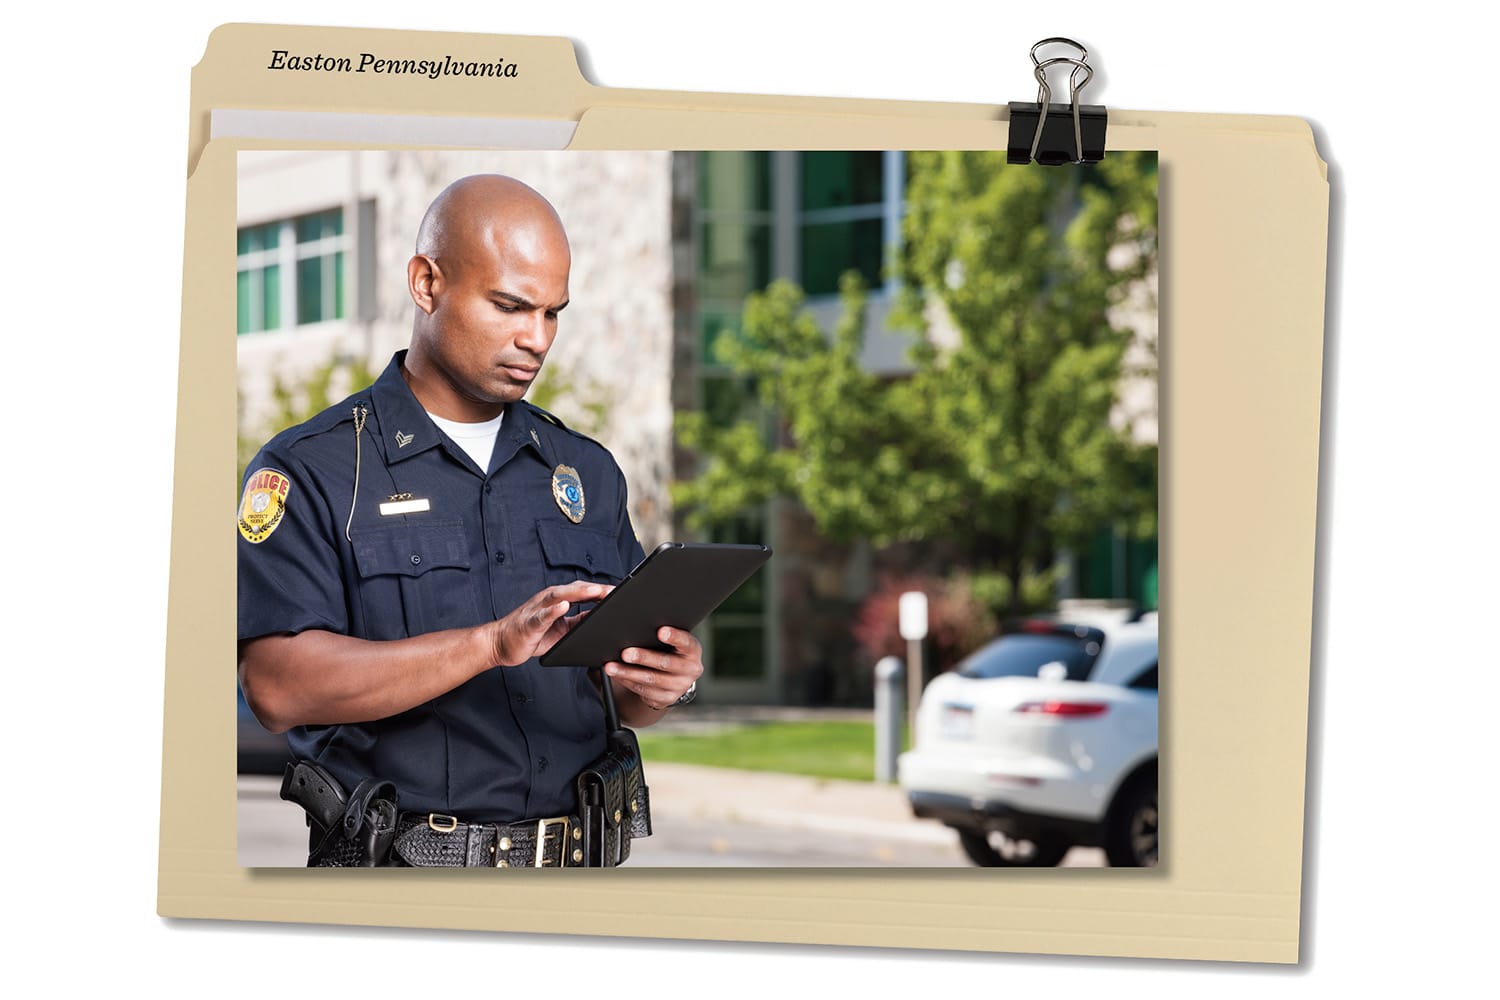 An image of a photo clipped to a file folder. The photo is of an african american male police officer using a tablet.